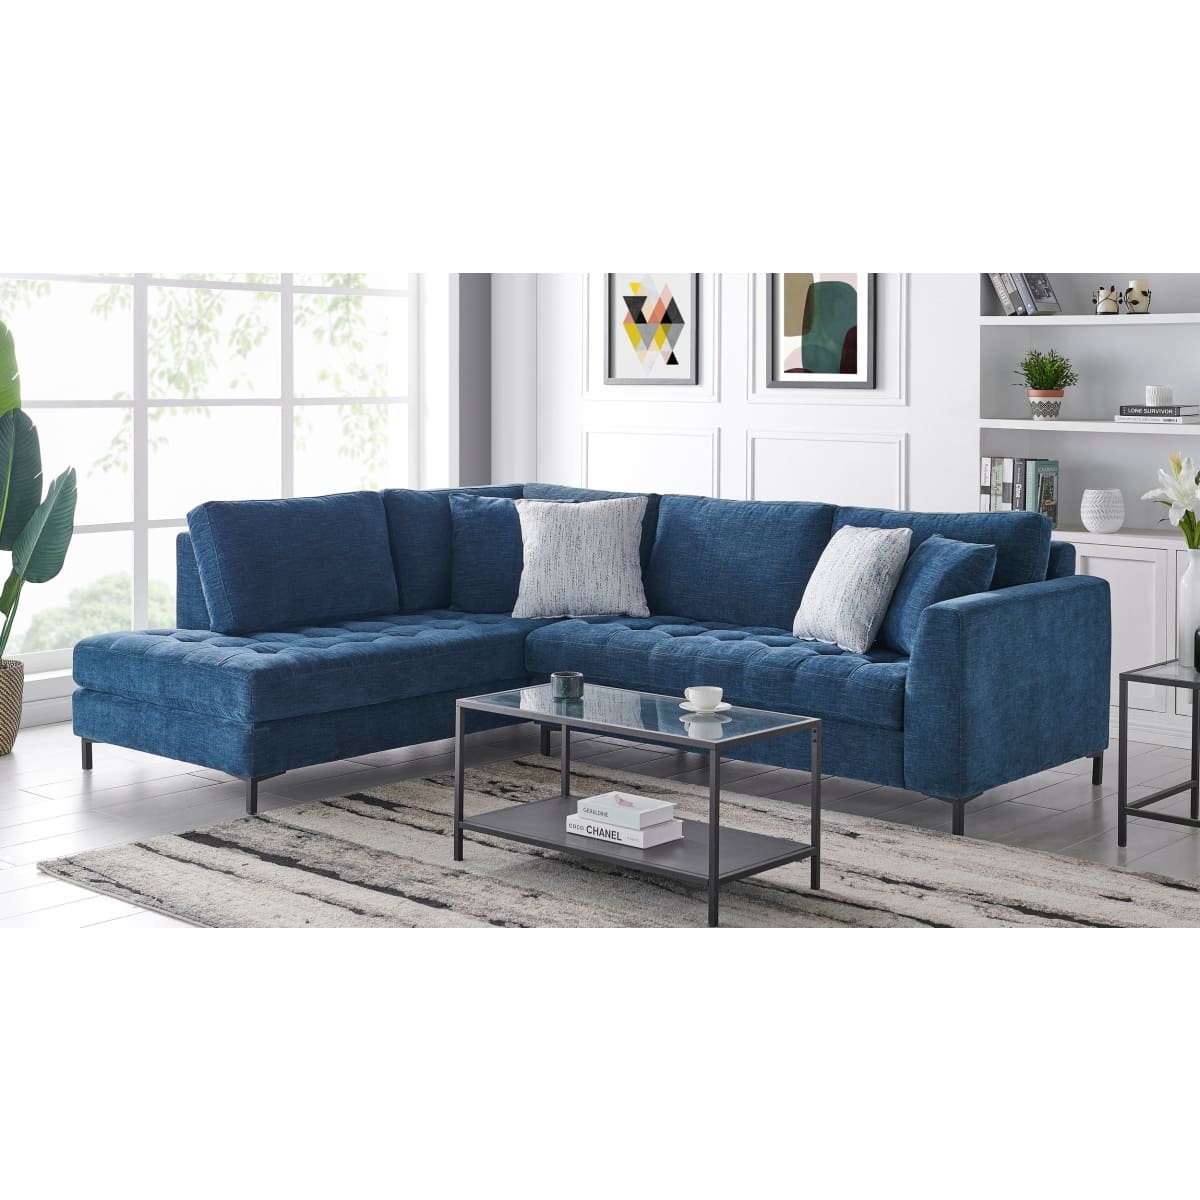 Ayden Sectional - Sectional